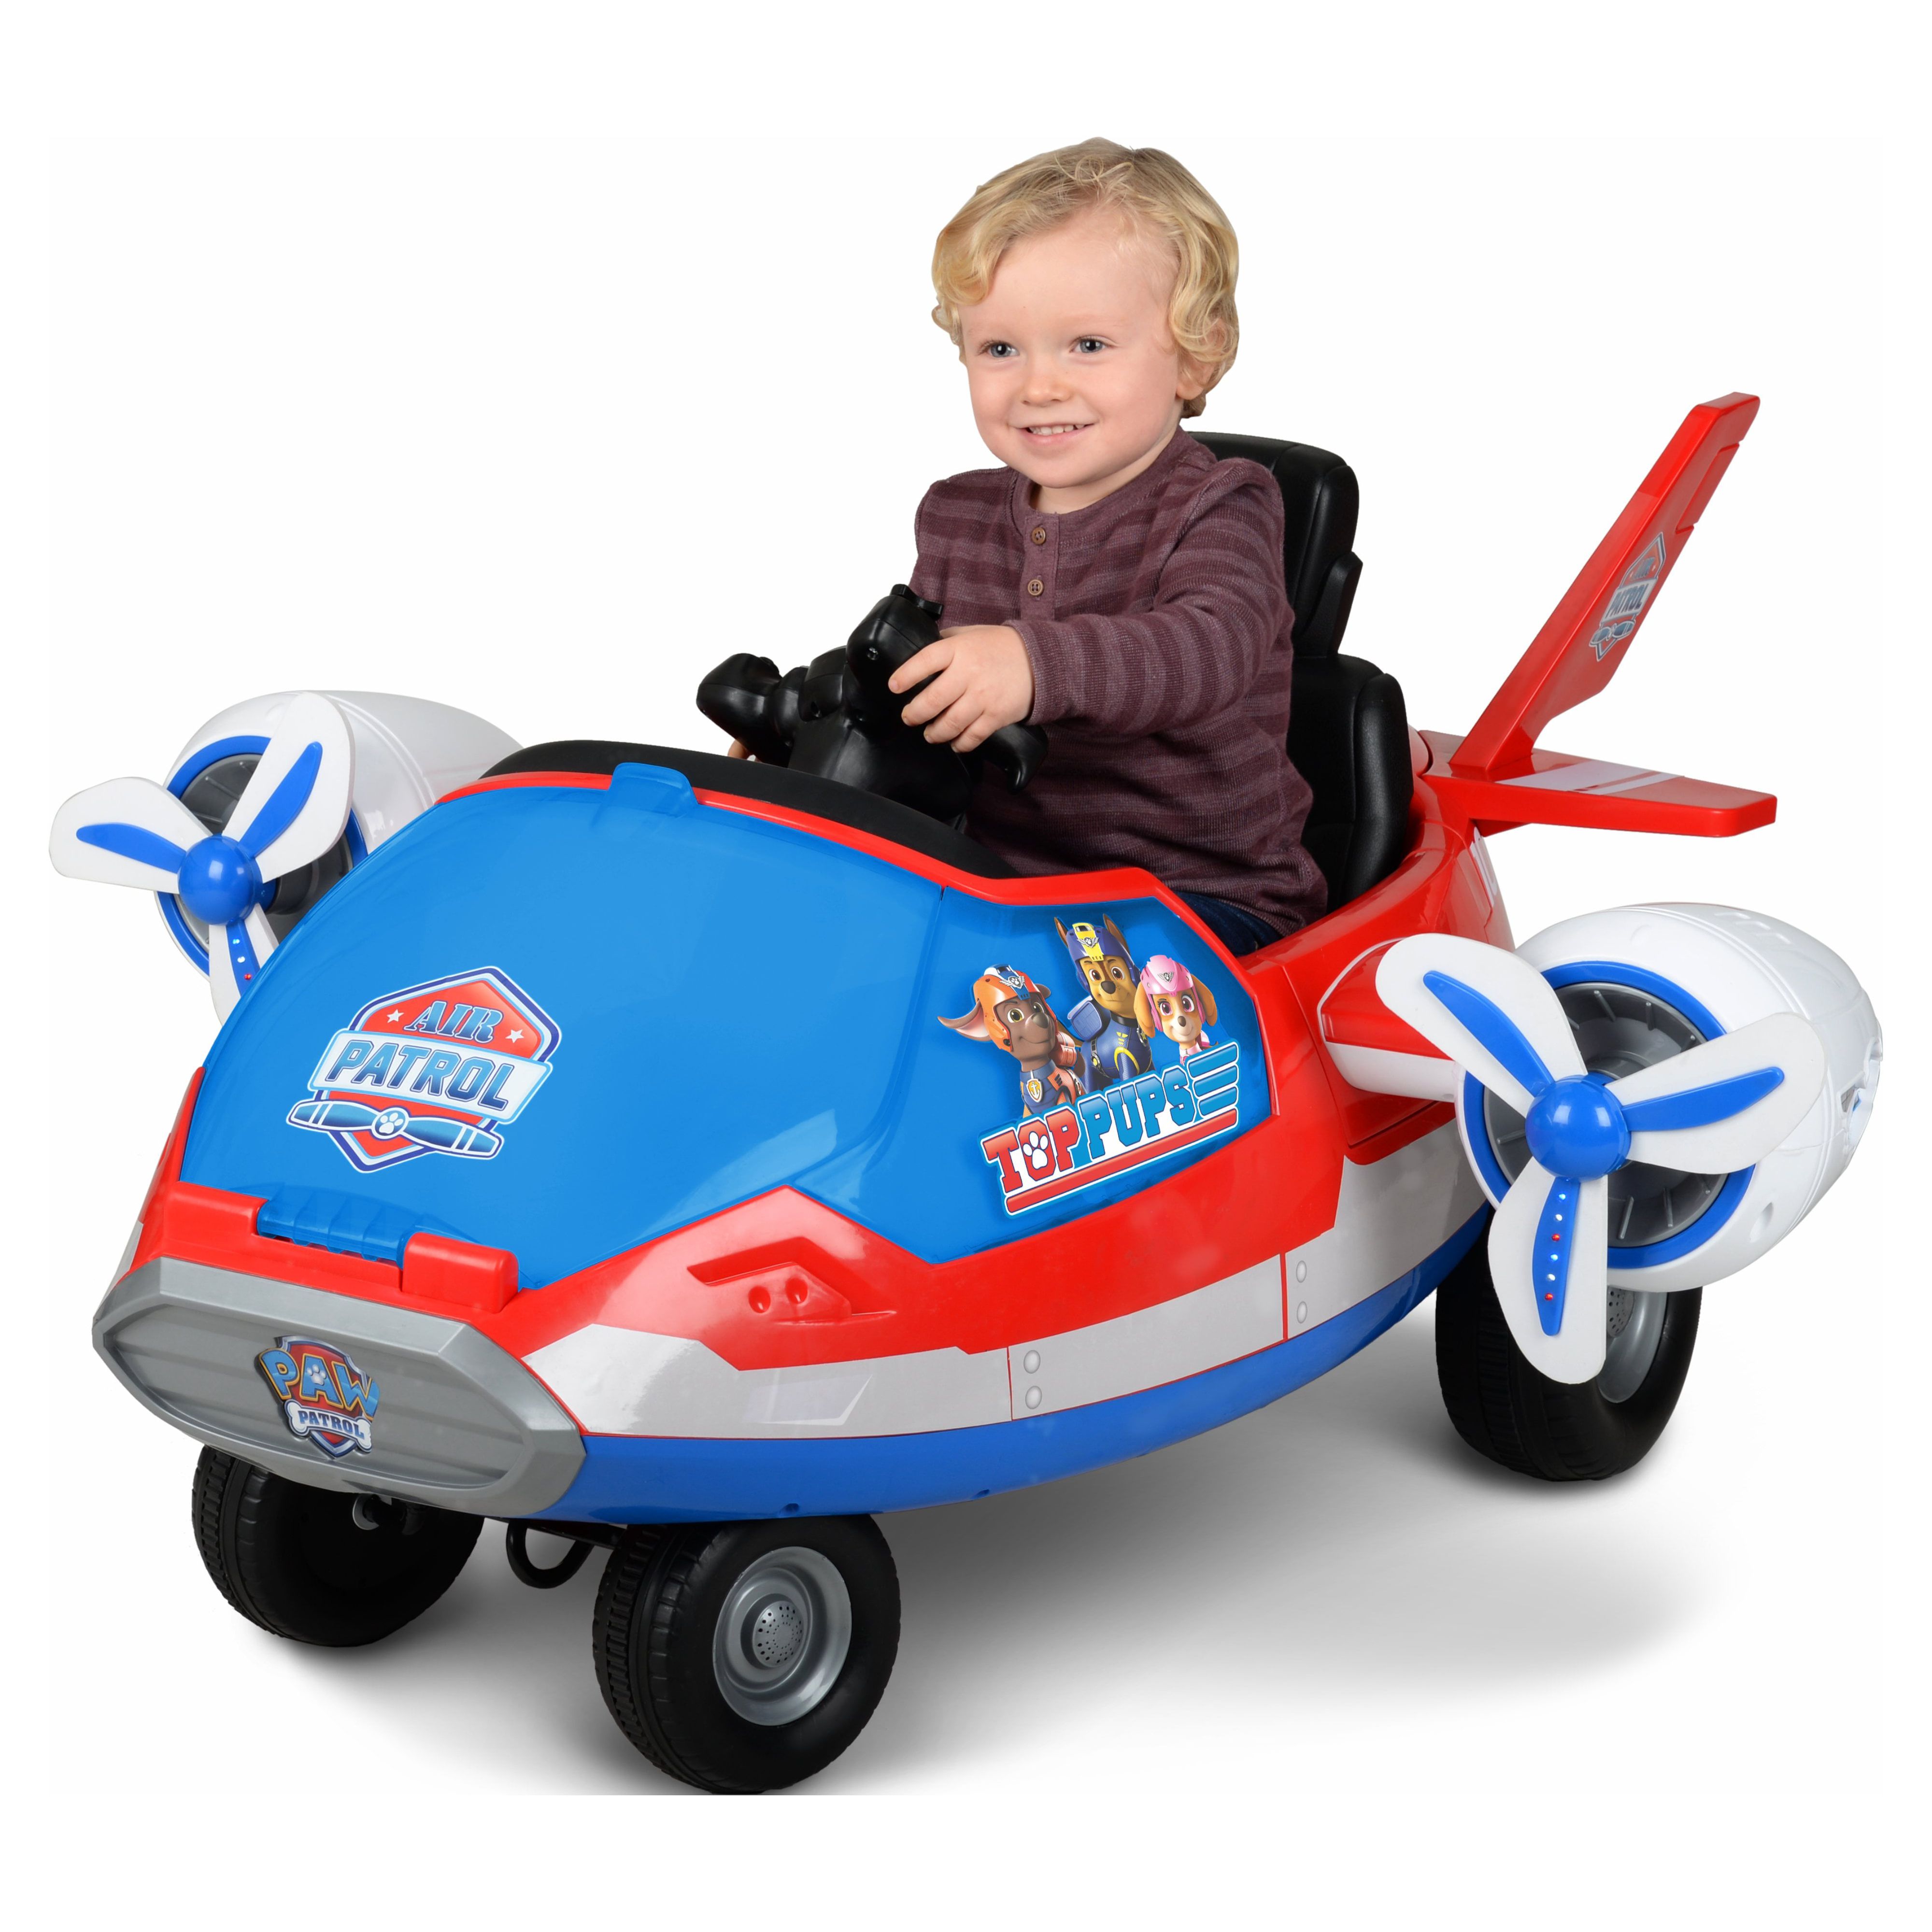 Nickelodeon 12 Volt Paw Patrol Airplane Battery Powered Ride On, for Ages 3 Years and up - image 1 of 11